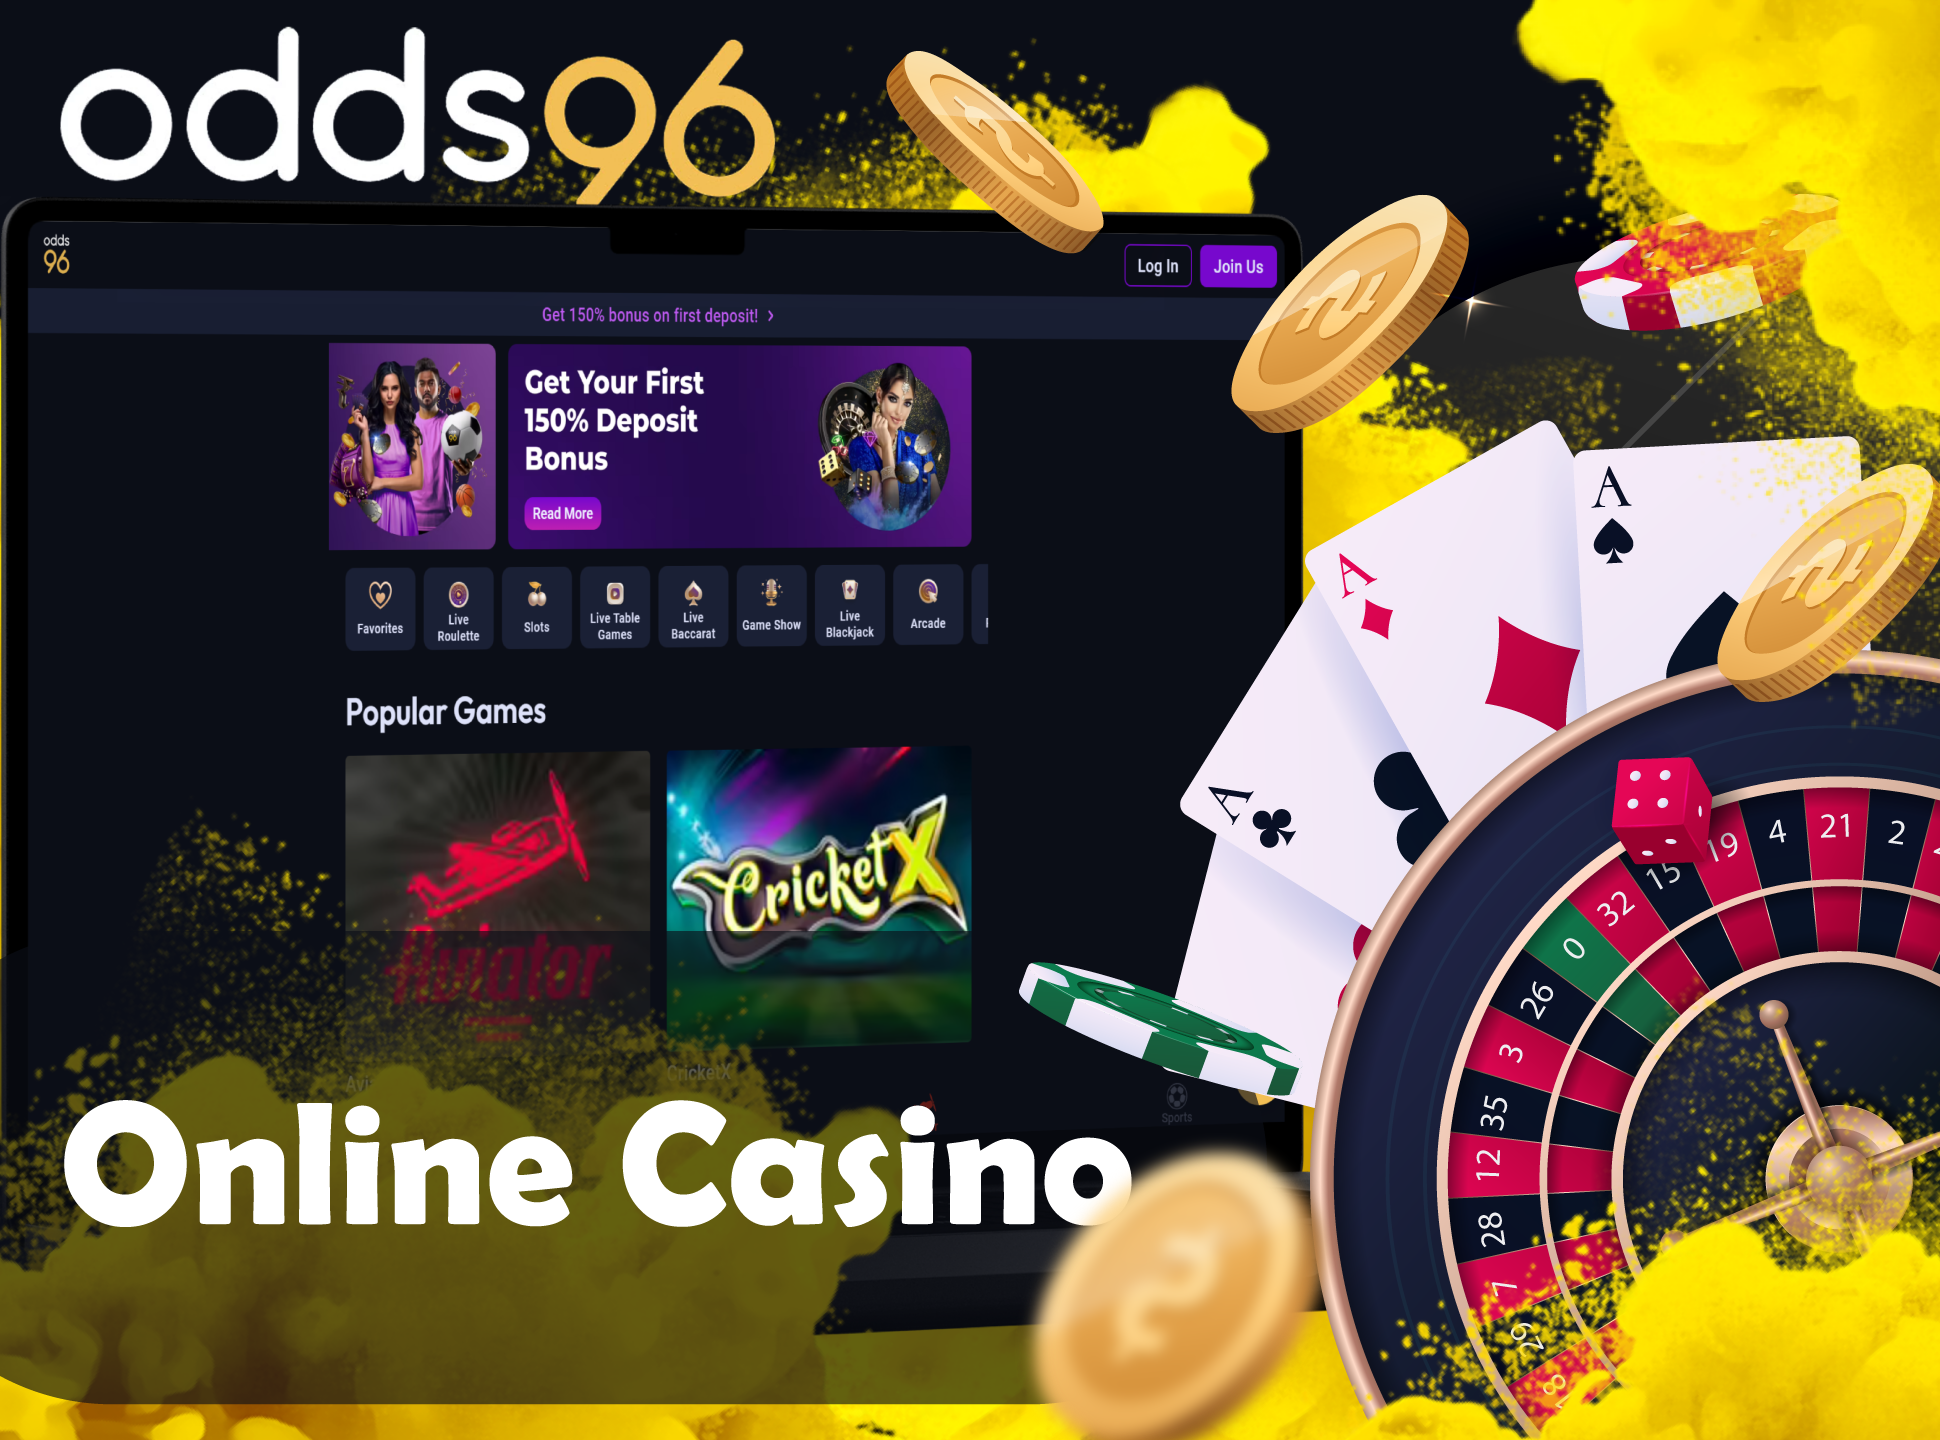 Play different popular casino games at Odds96.